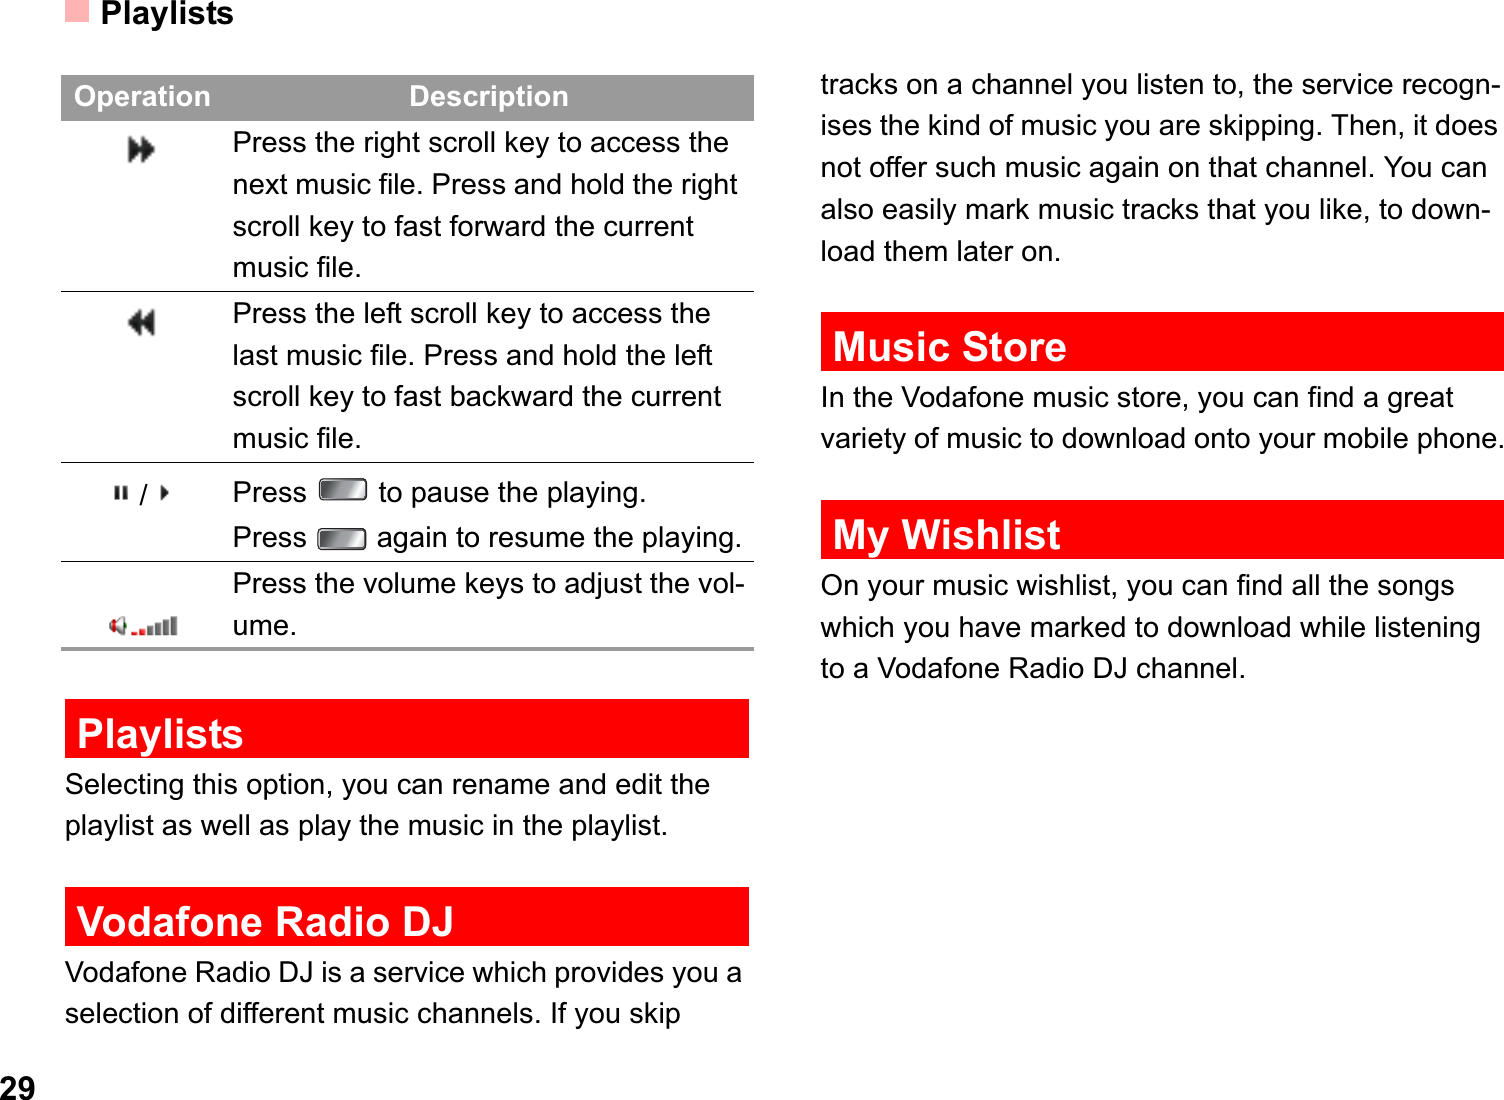 Playlists29PlaylistsSelecting this option, you can rename and edit the playlist as well as play the music in the playlist.Vodafone Radio DJVodafone Radio DJ is a service which provides you a selection of different music channels. If you skip tracks on a channel you listen to, the service recogn-ises the kind of music you are skipping. Then, it does not offer such music again on that channel. You can also easily mark music tracks that you like, to down-load them later on. Music StoreIn the Vodafone music store, you can find a great variety of music to download onto your mobile phone.My WishlistOn your music wishlist, you can find all the songs which you have marked to download while listening to a Vodafone Radio DJ channel. Press the right scroll key to access the next music file. Press and hold the right scroll key to fast forward the current music file.Press the left scroll key to access the last music file. Press and hold the left scroll key to fast backward the current music file./Press   to pause the playing. Press   again to resume the playing.      Press the volume keys to adjust the vol-ume.Operation Description